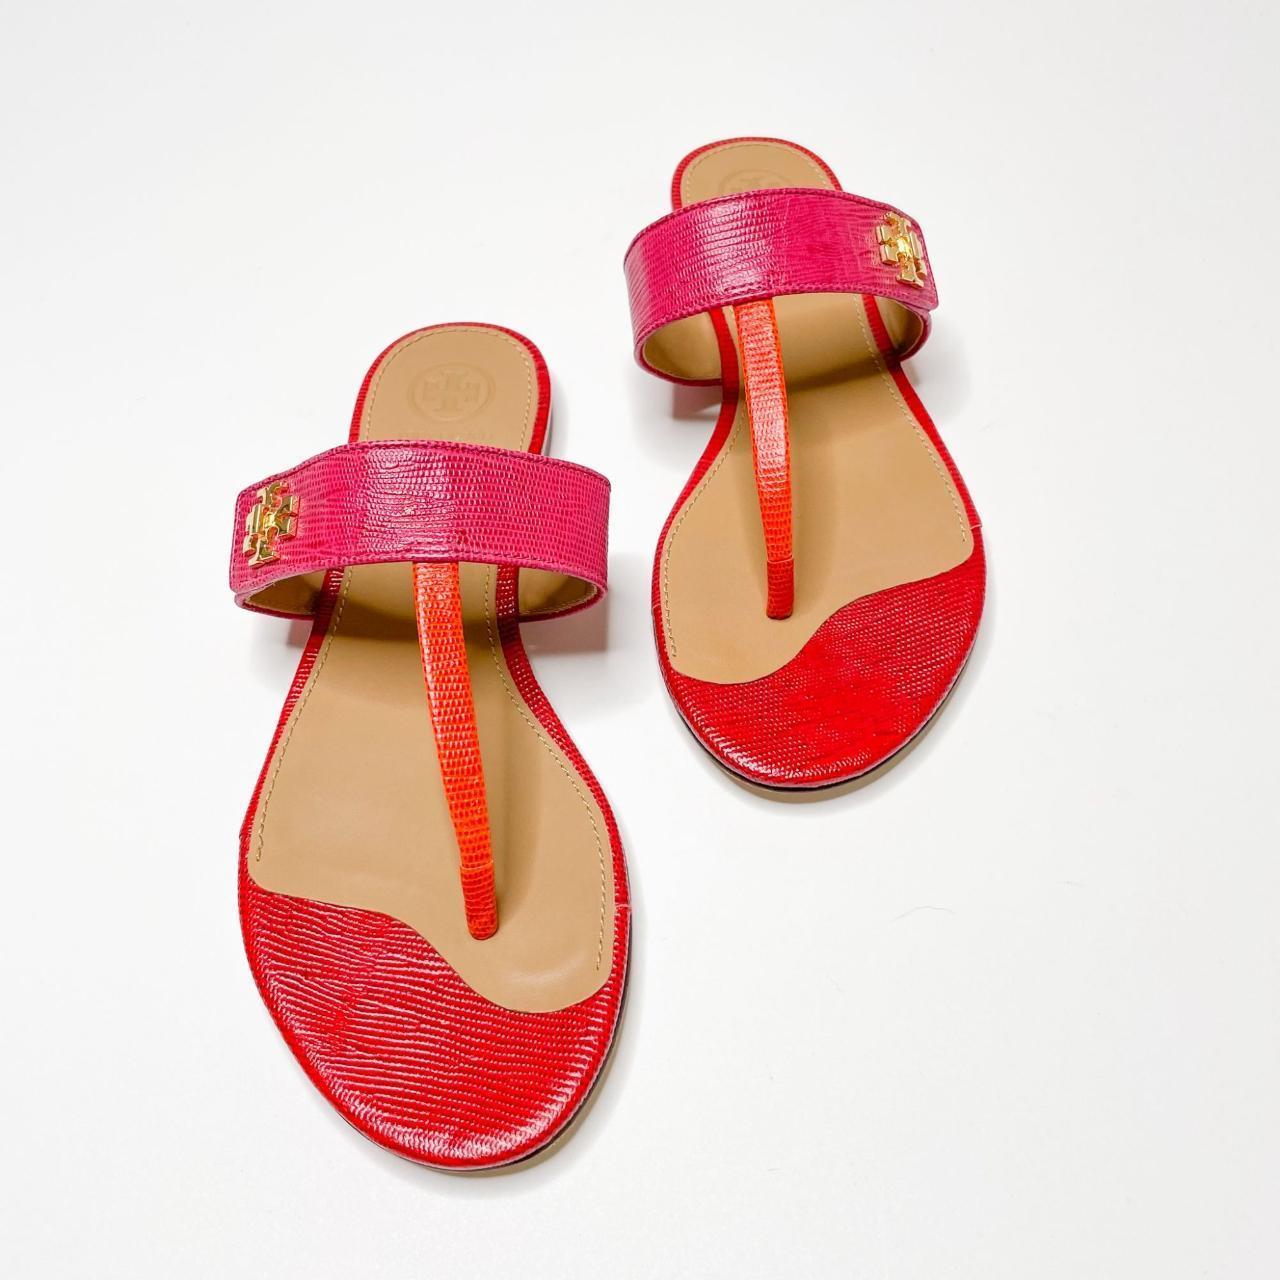 Tory Burch Women's Pink and Red Sandals | Depop